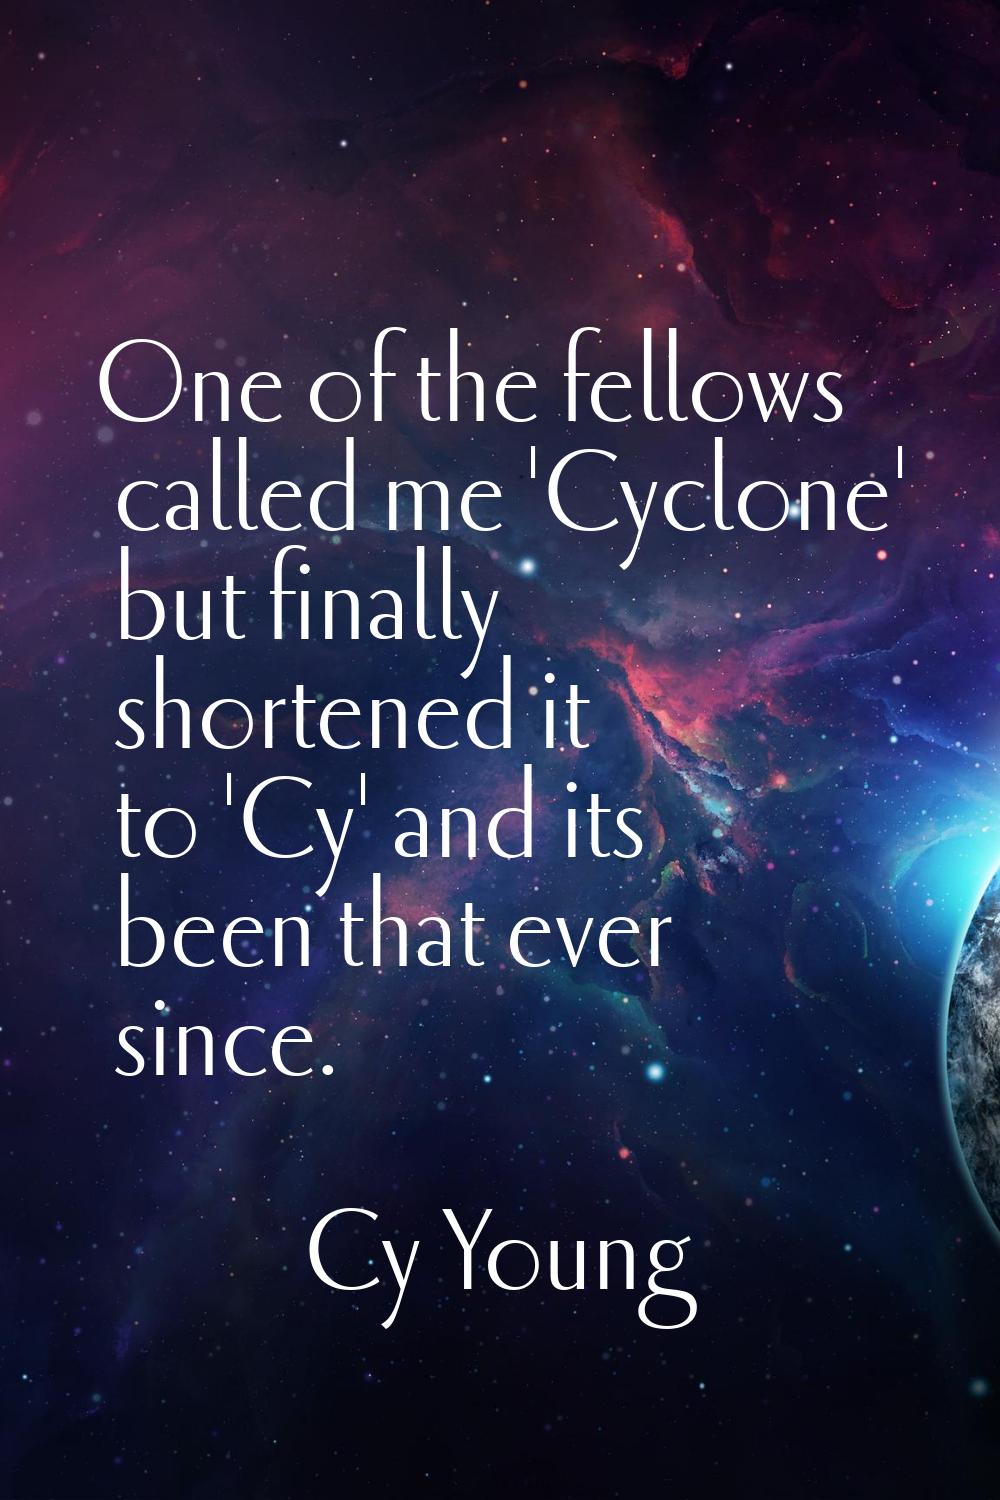 One of the fellows called me 'Cyclone' but finally shortened it to 'Cy' and its been that ever sinc